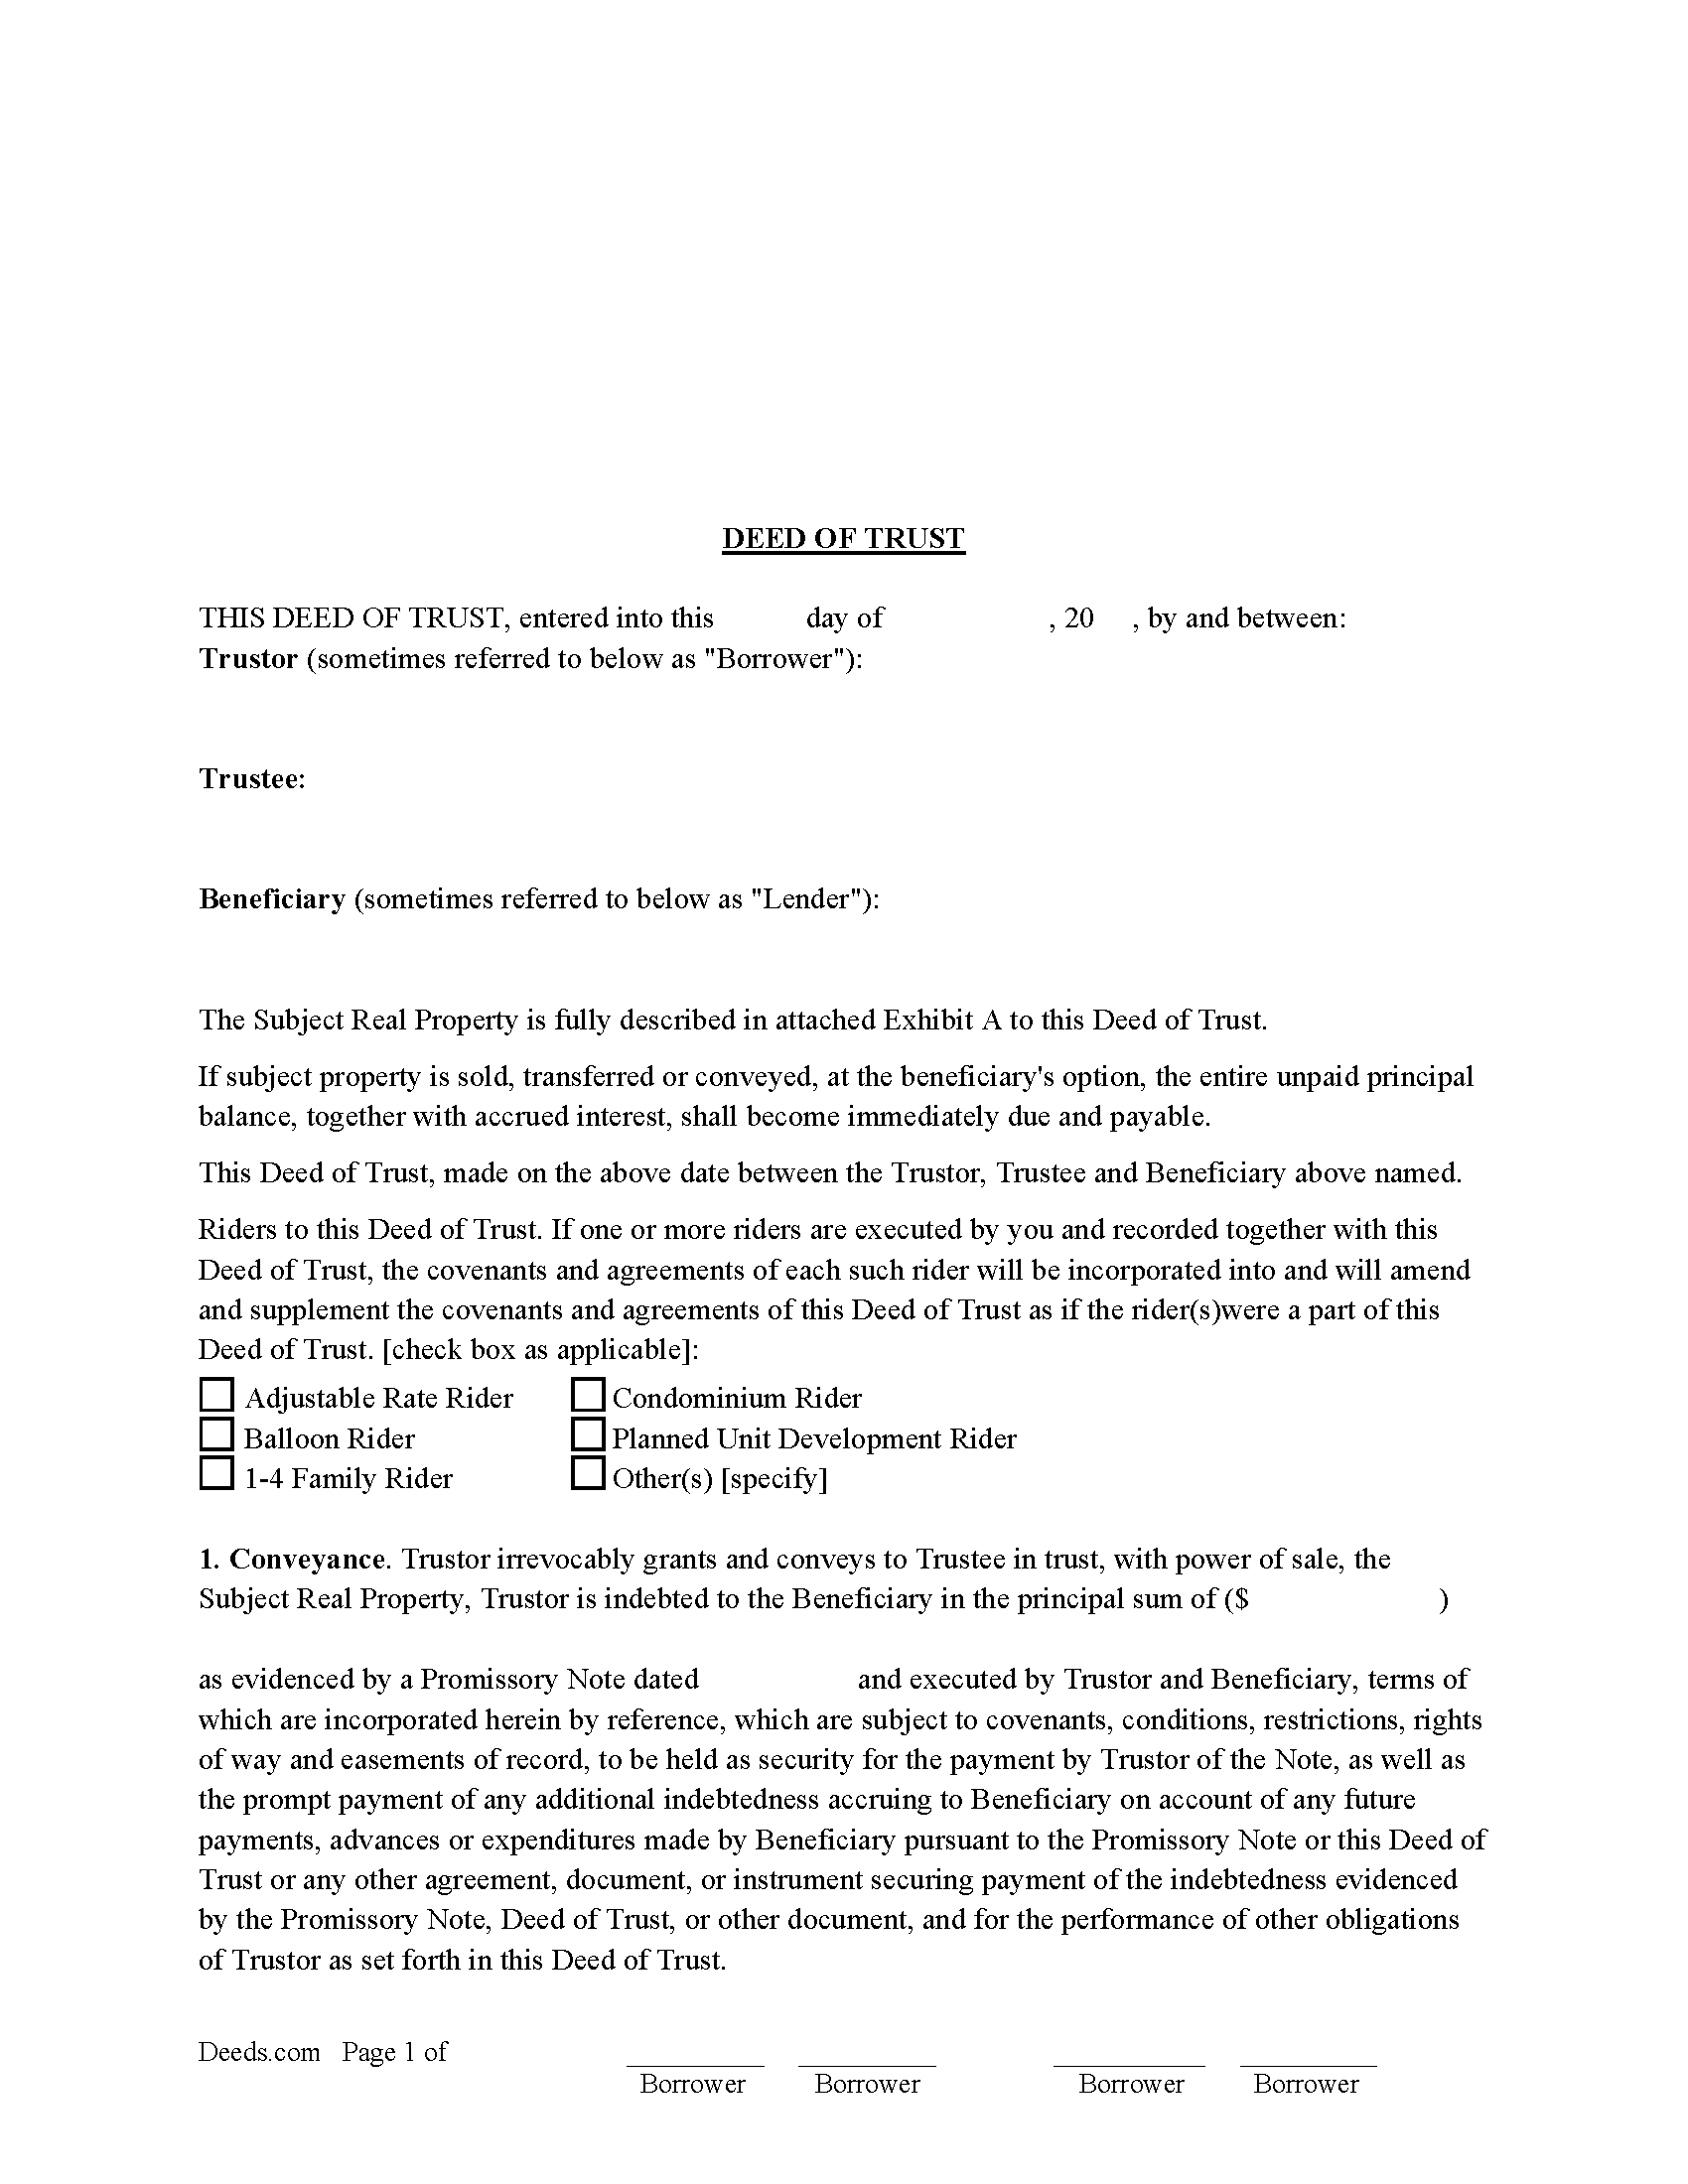 West Virginia Deed of Trust and Promissory Note Image